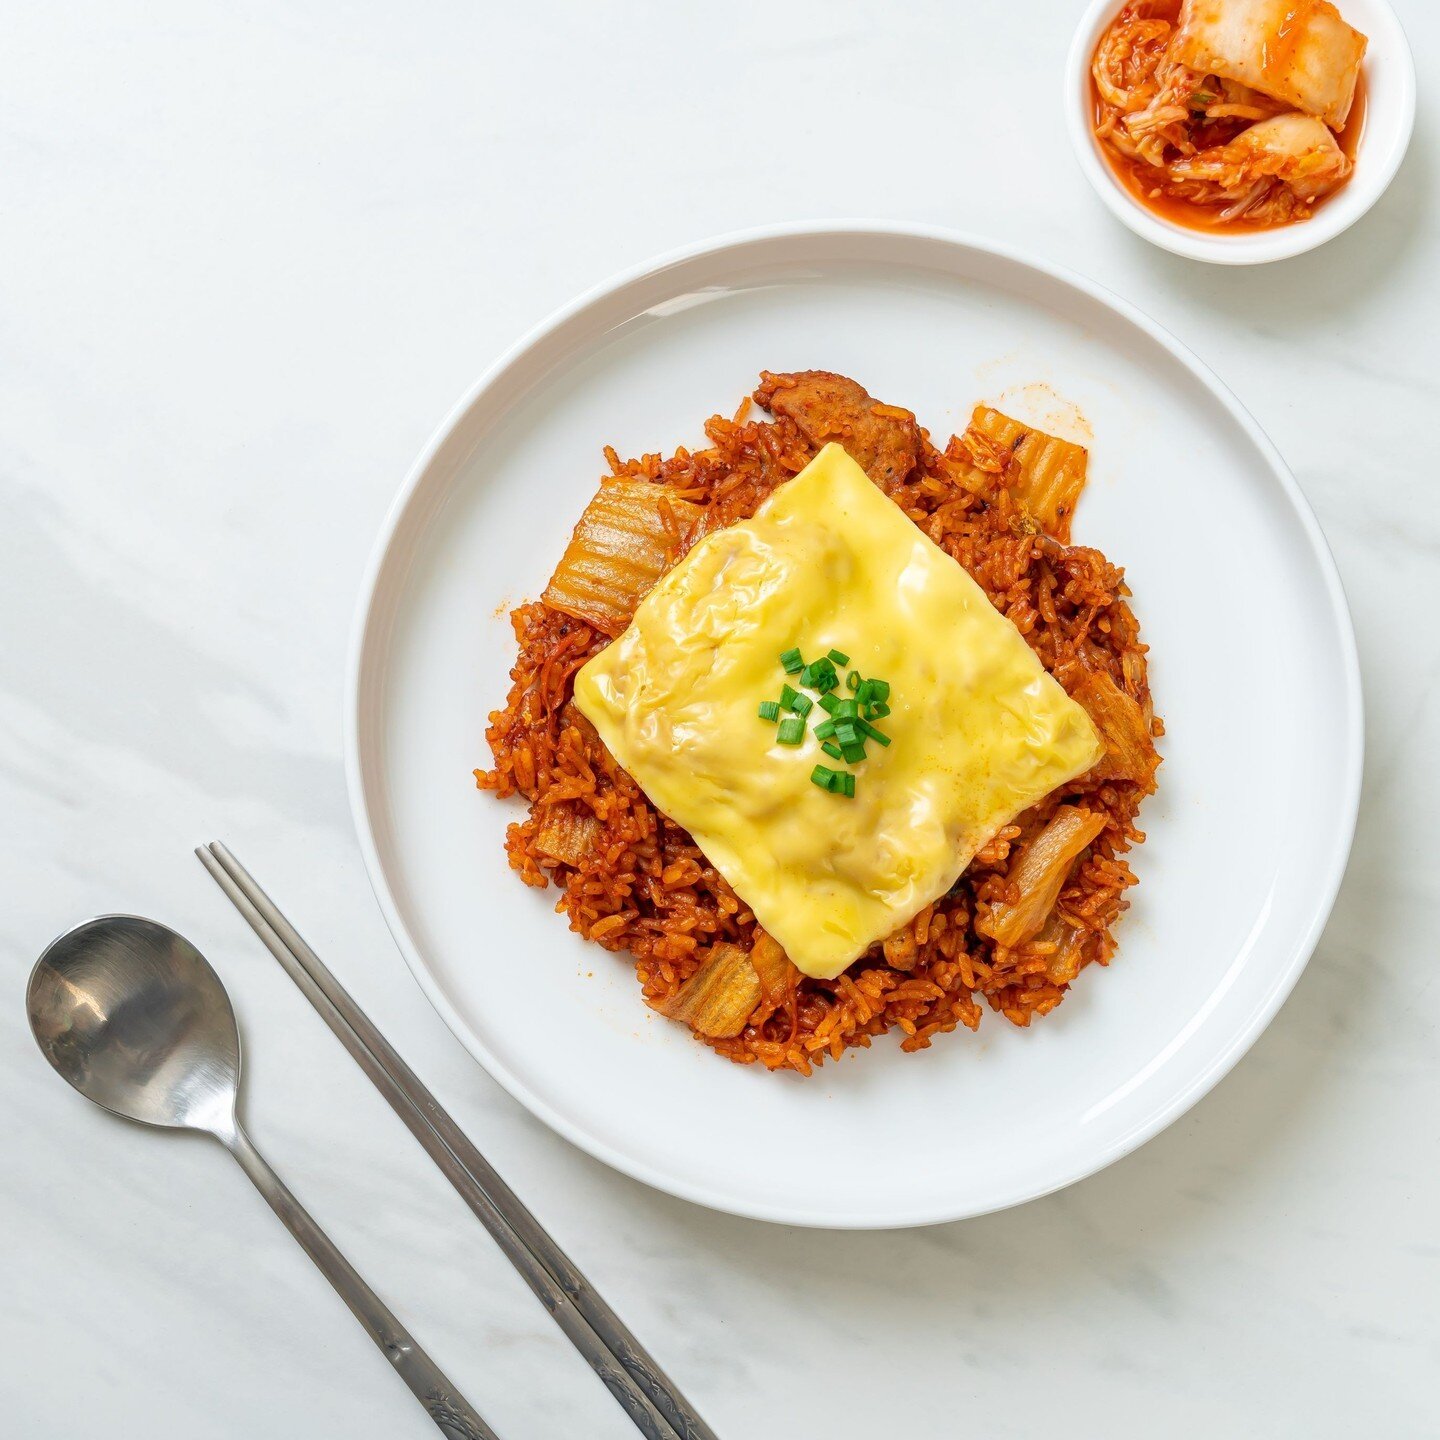 Haven't decided what to eat for lunch today? Here is today's recommendation: Kimchi Fried Rice. Spice up your regular fried rice with Kimchi! ⁠
⁠
⁠
#Hmart #Rice #asianfood #Lunchidea #Lunch #Koreanfood #Korean #brunch #Kimchi #hungry #delicious #food